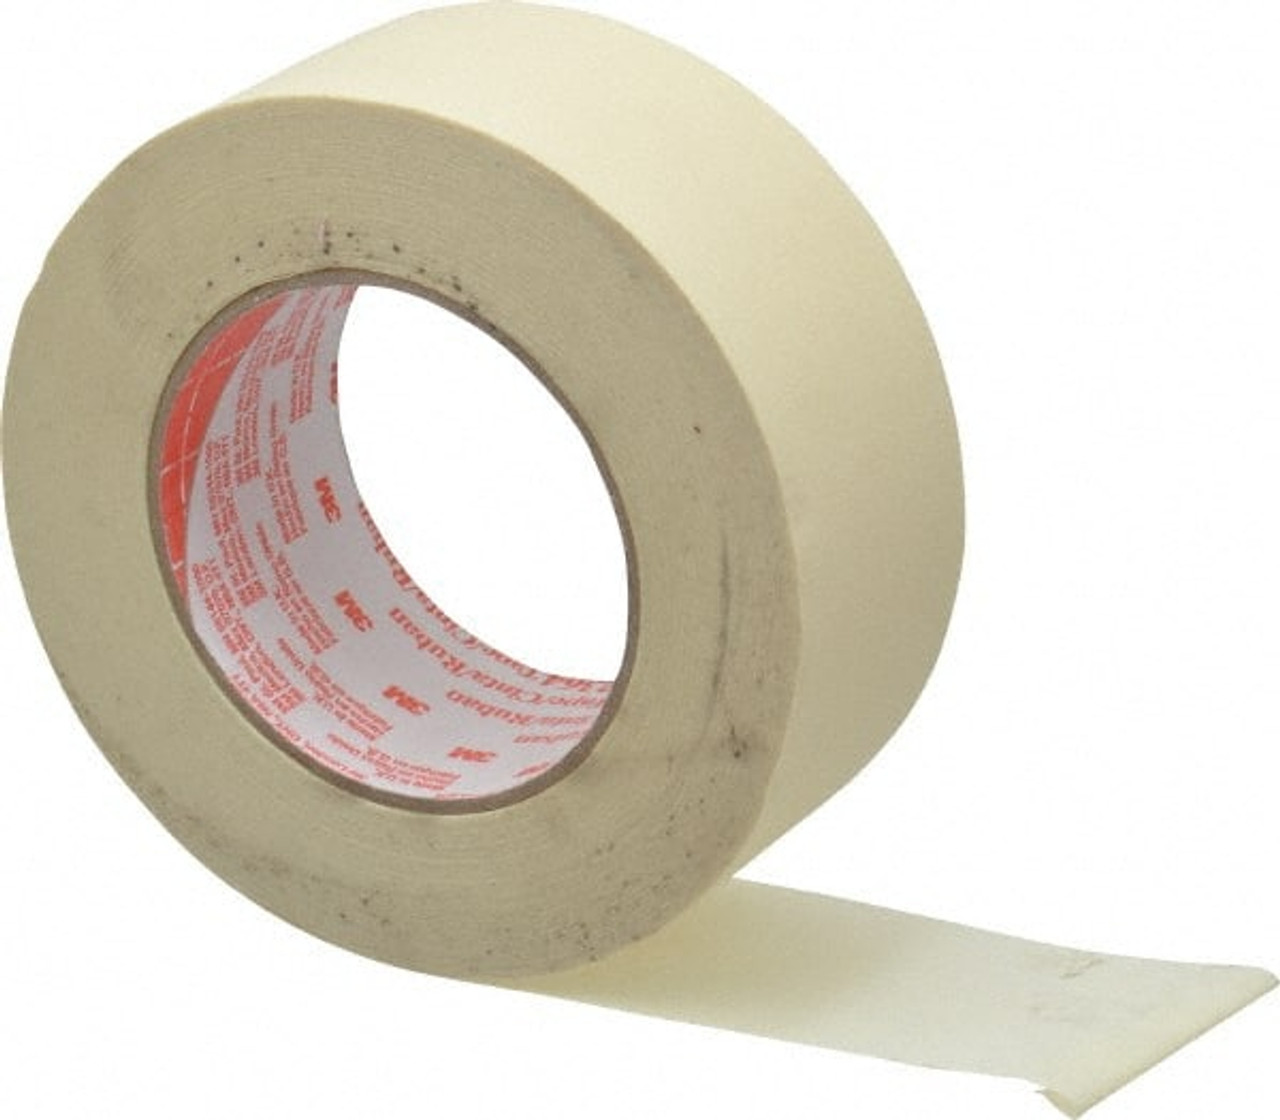 3M 2 Wide Masking/Painters Tape Rubber Adhesive 7000118481 - 06900120 -  Penn Tool Co., Inc